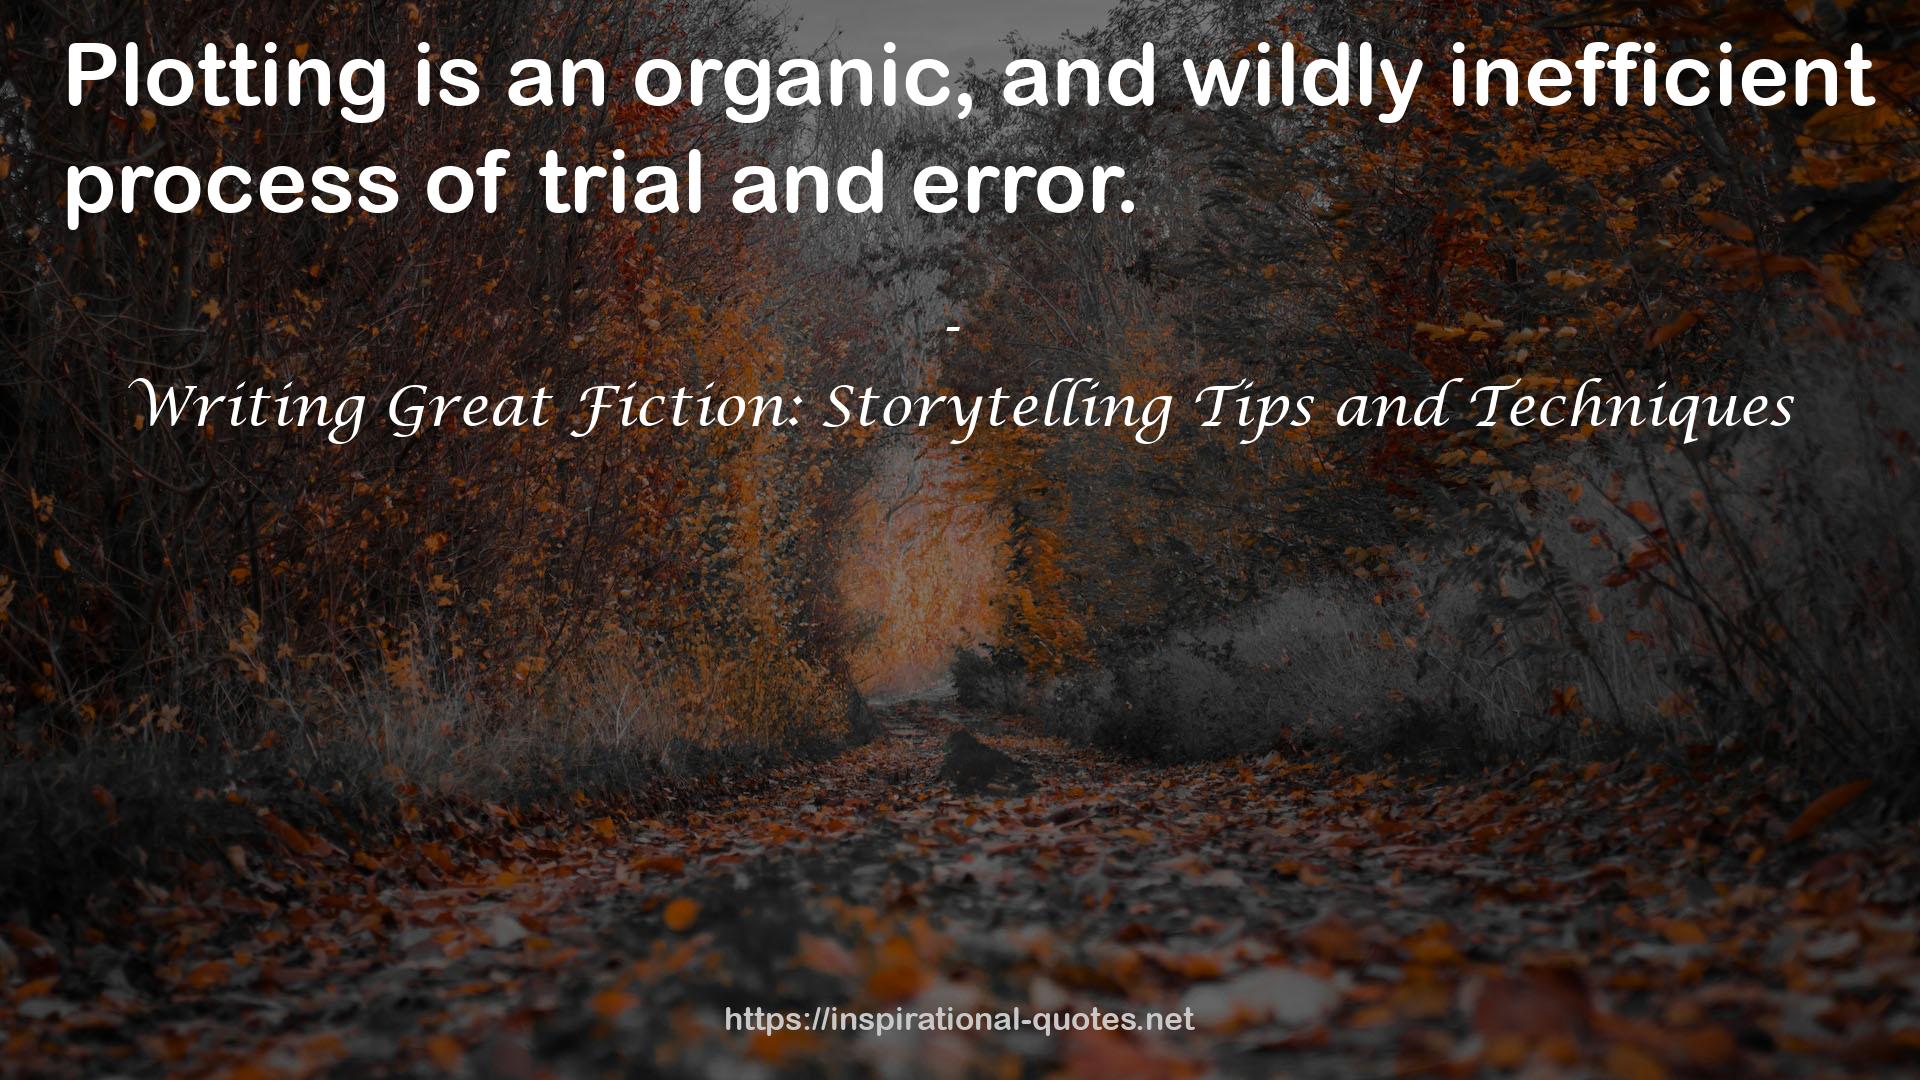 Writing Great Fiction: Storytelling Tips and Techniques QUOTES